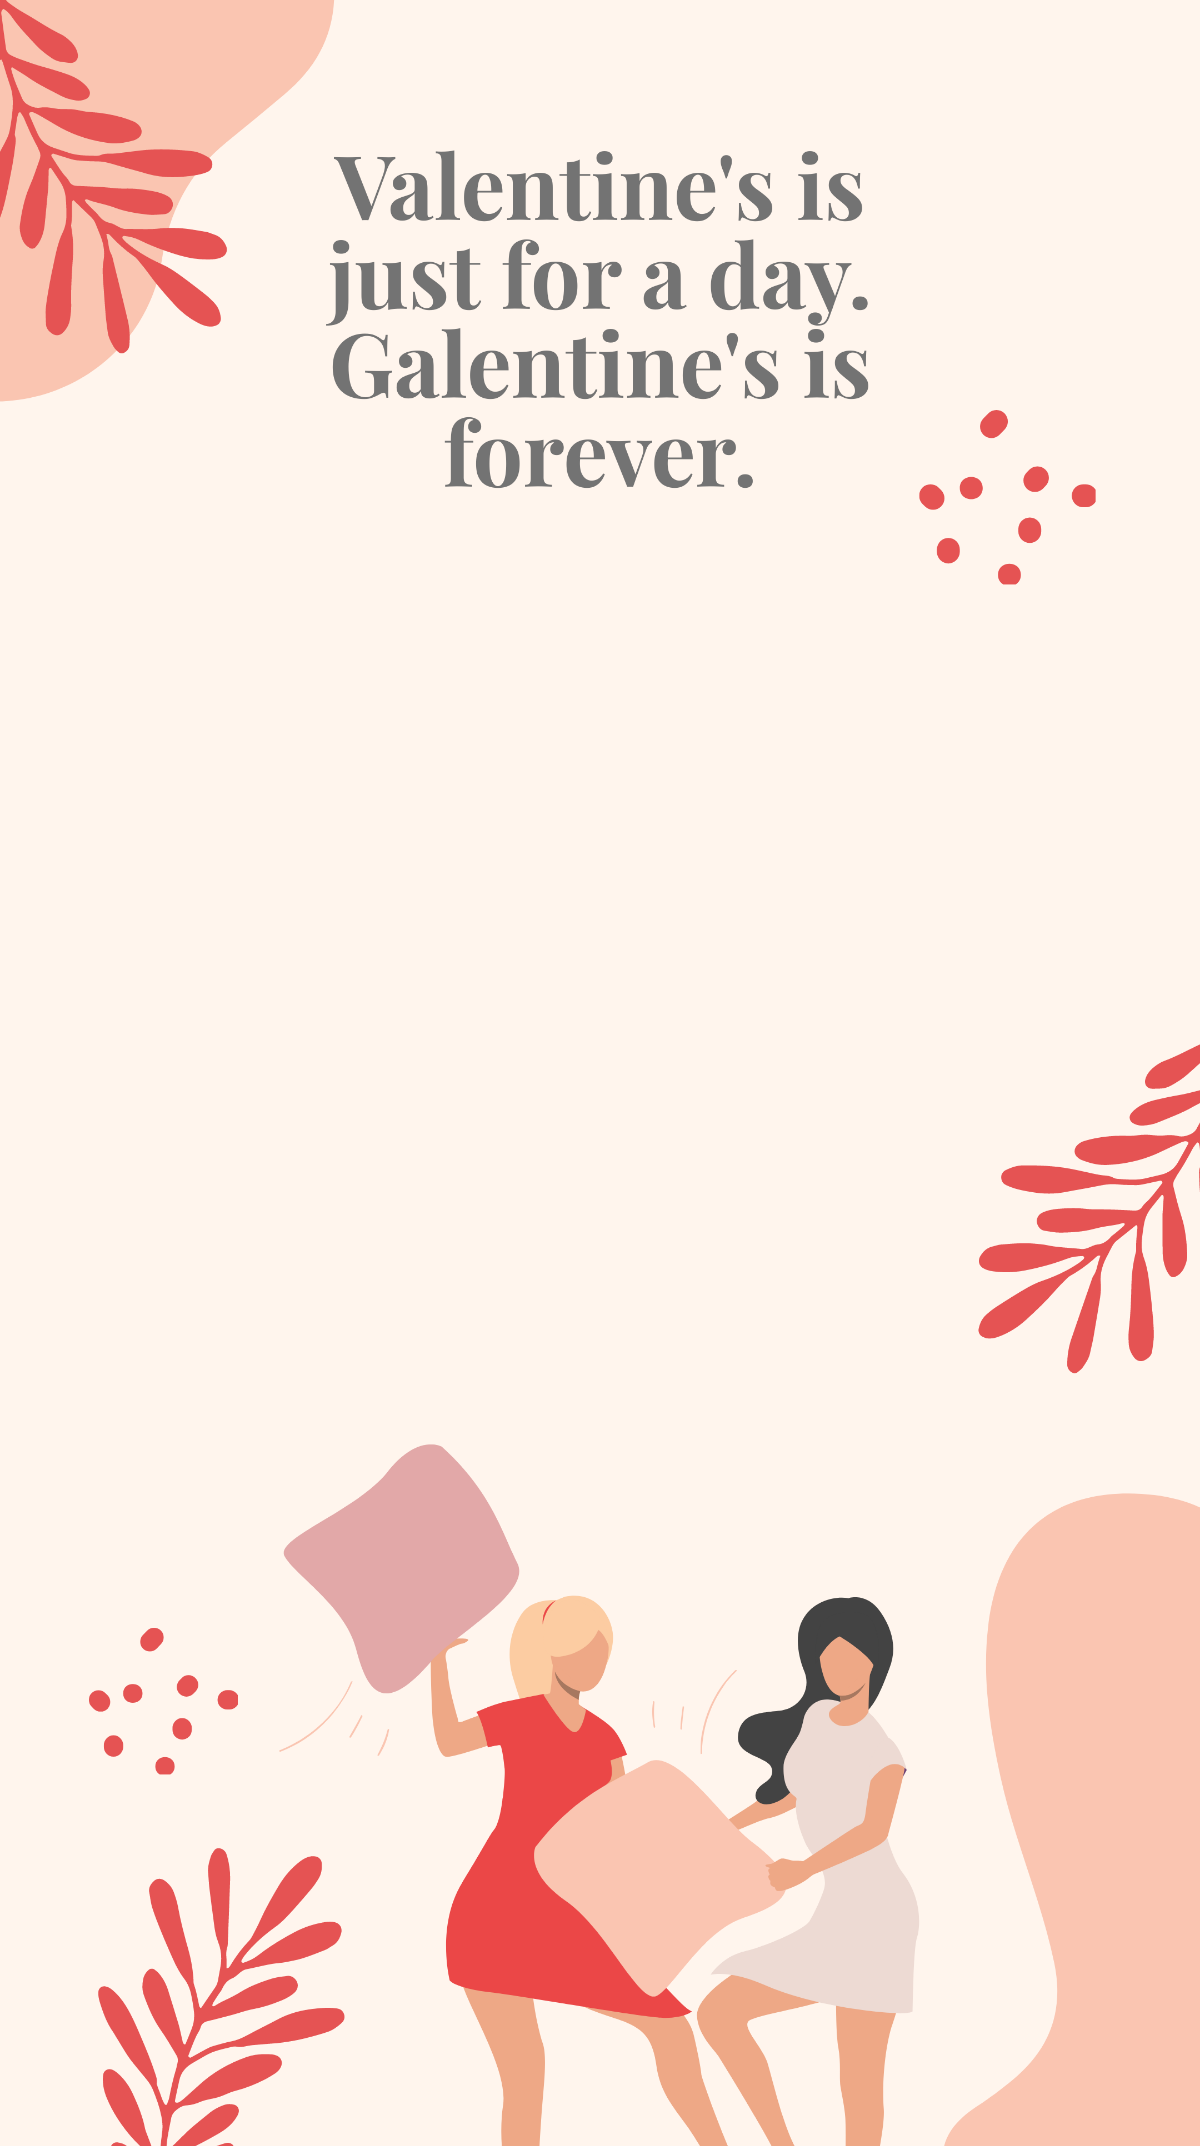 Free Funny Galentines Day Snapchat Geofilter Template